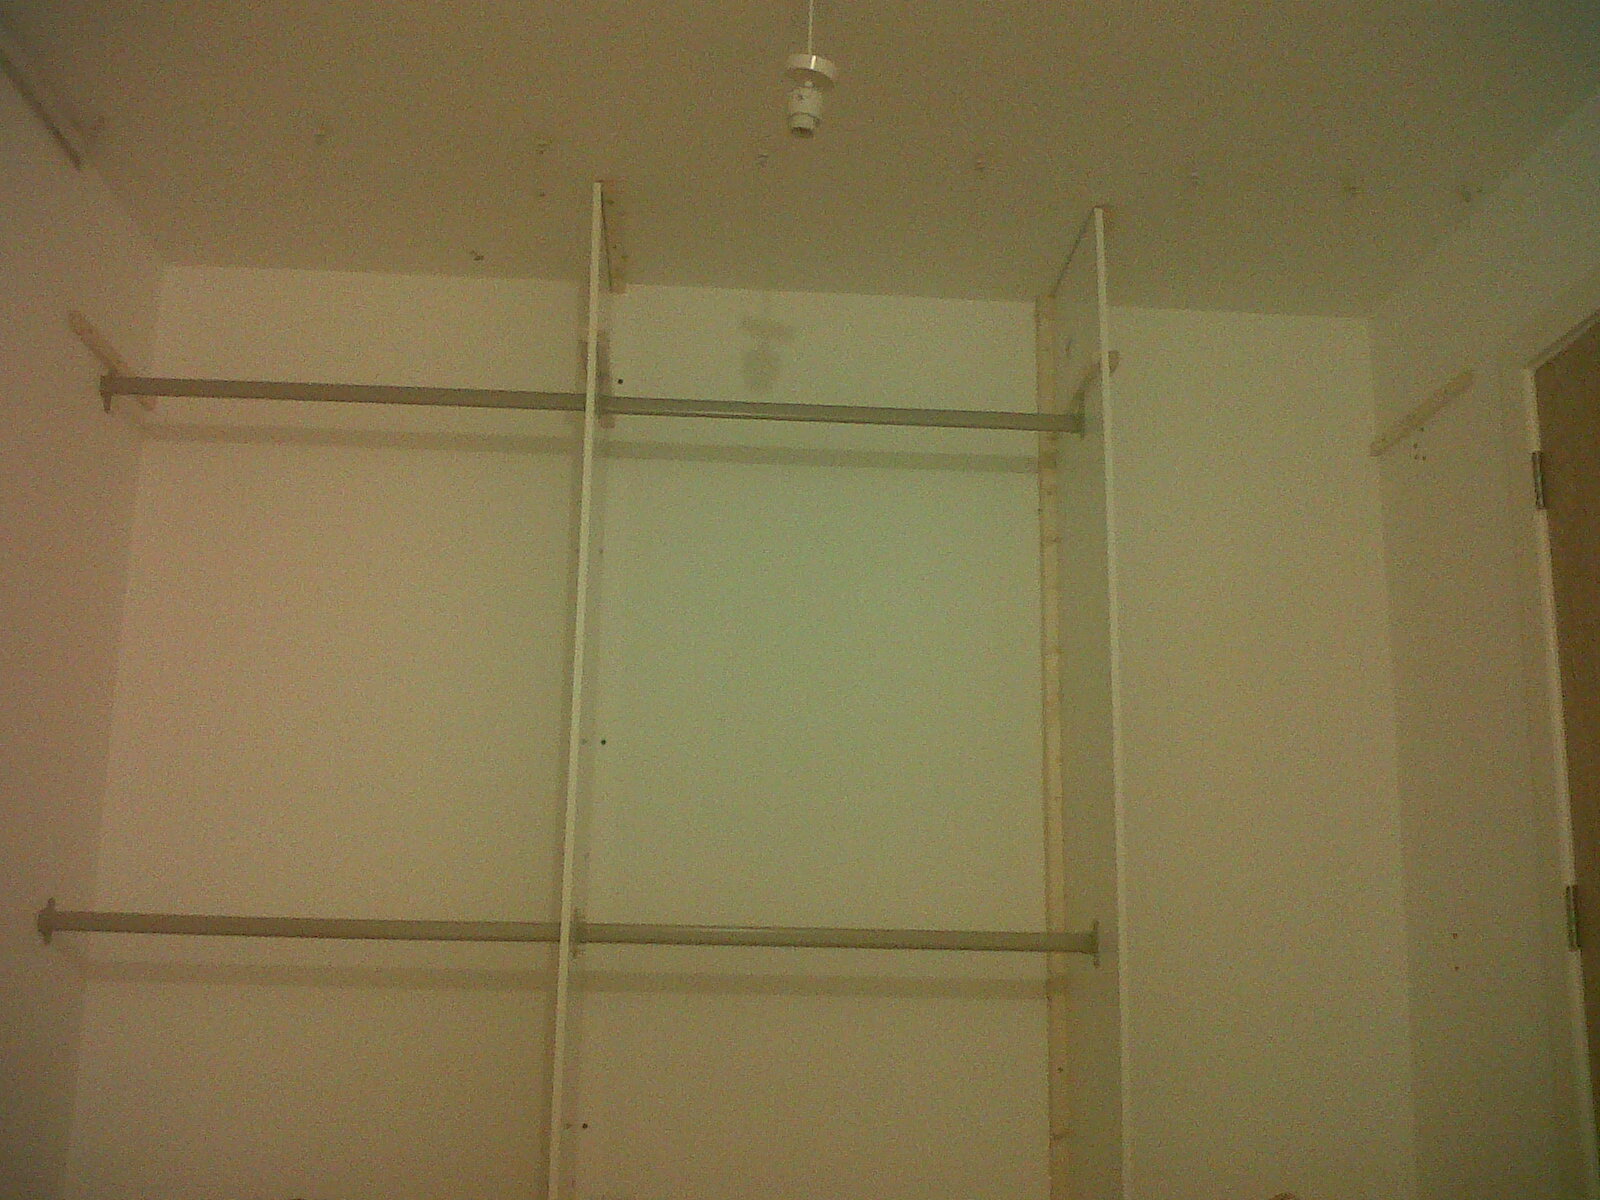 besta shelves and pax wardrobes ikeahackers net39 wide pax wardrobes